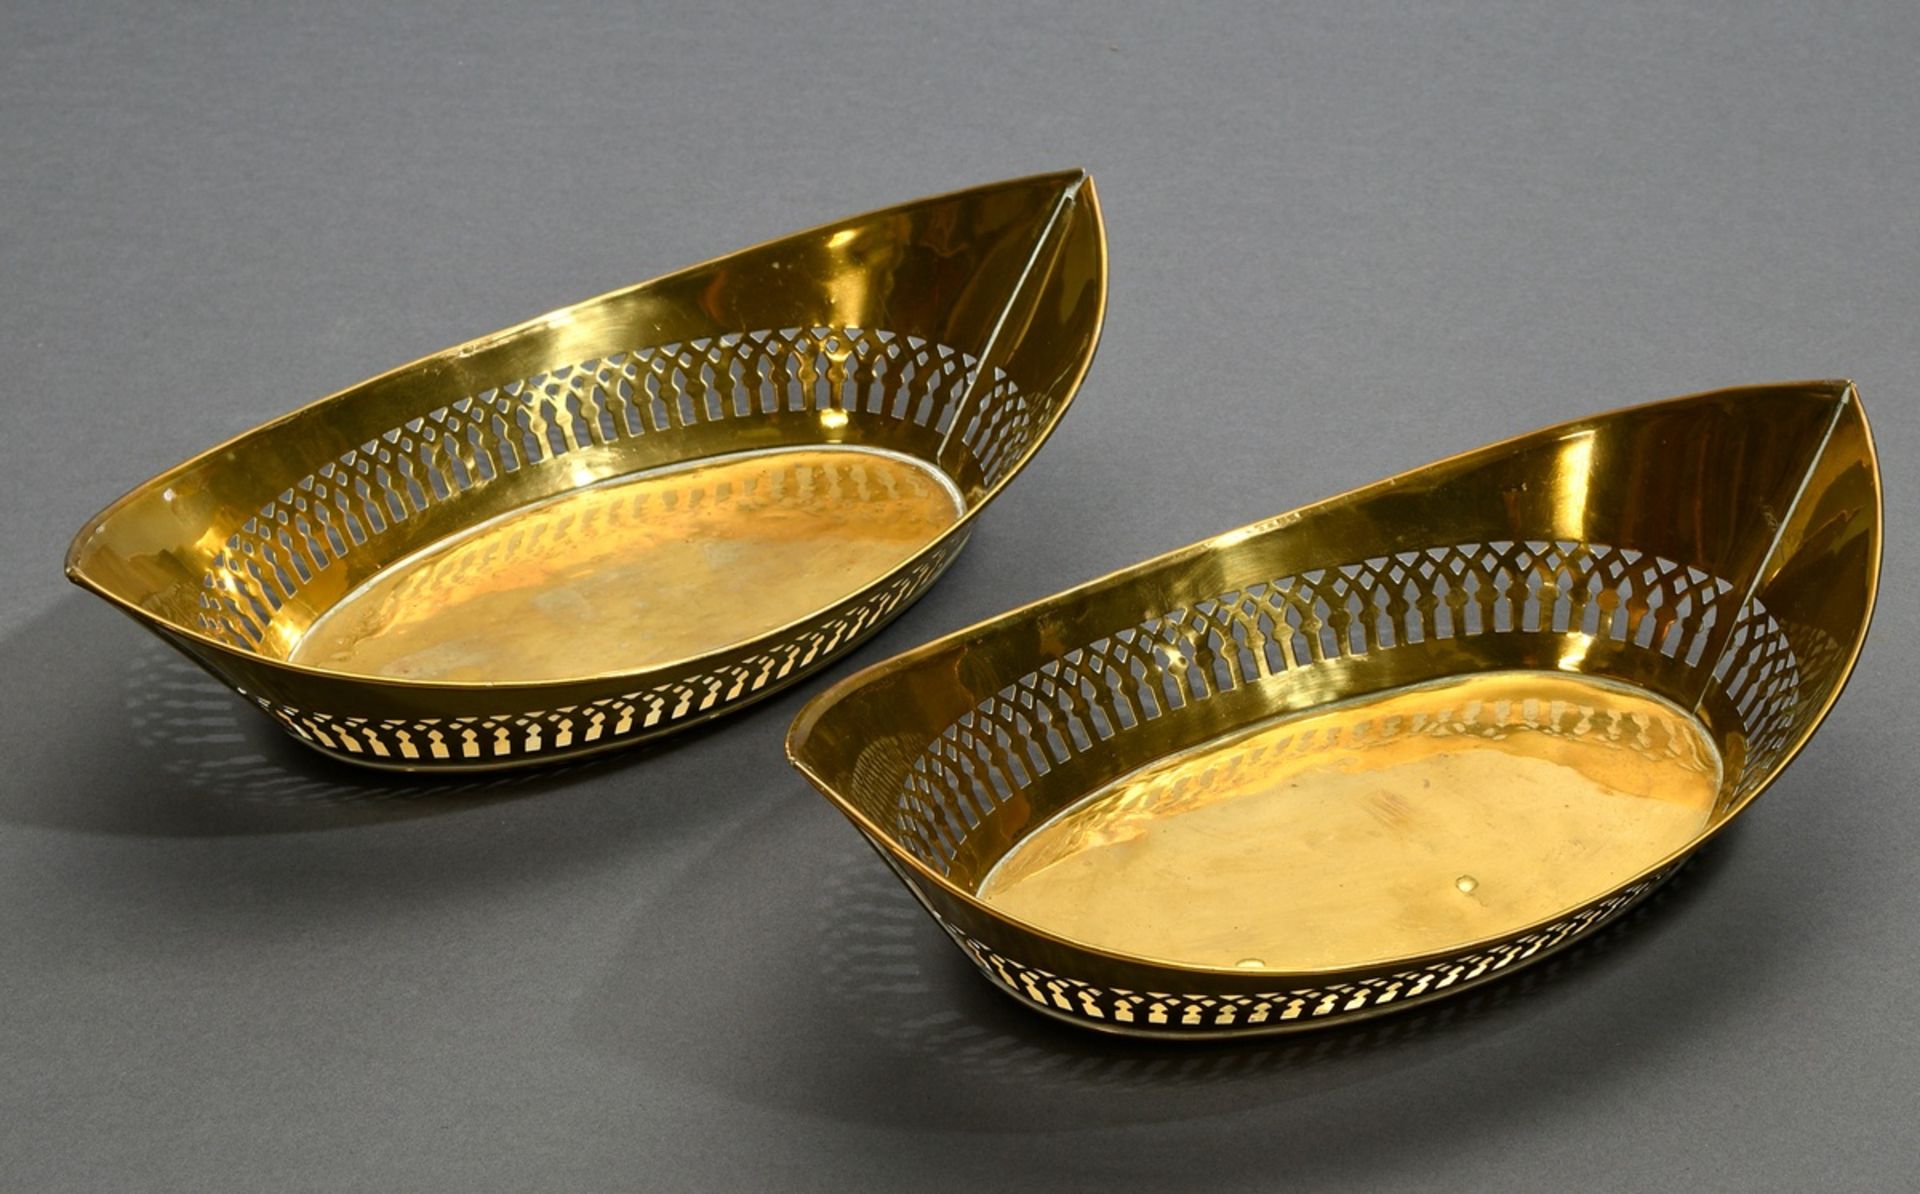 Pair of brass bread baskets in the shape of boats with classic lattice openings, 19th century, 31.5